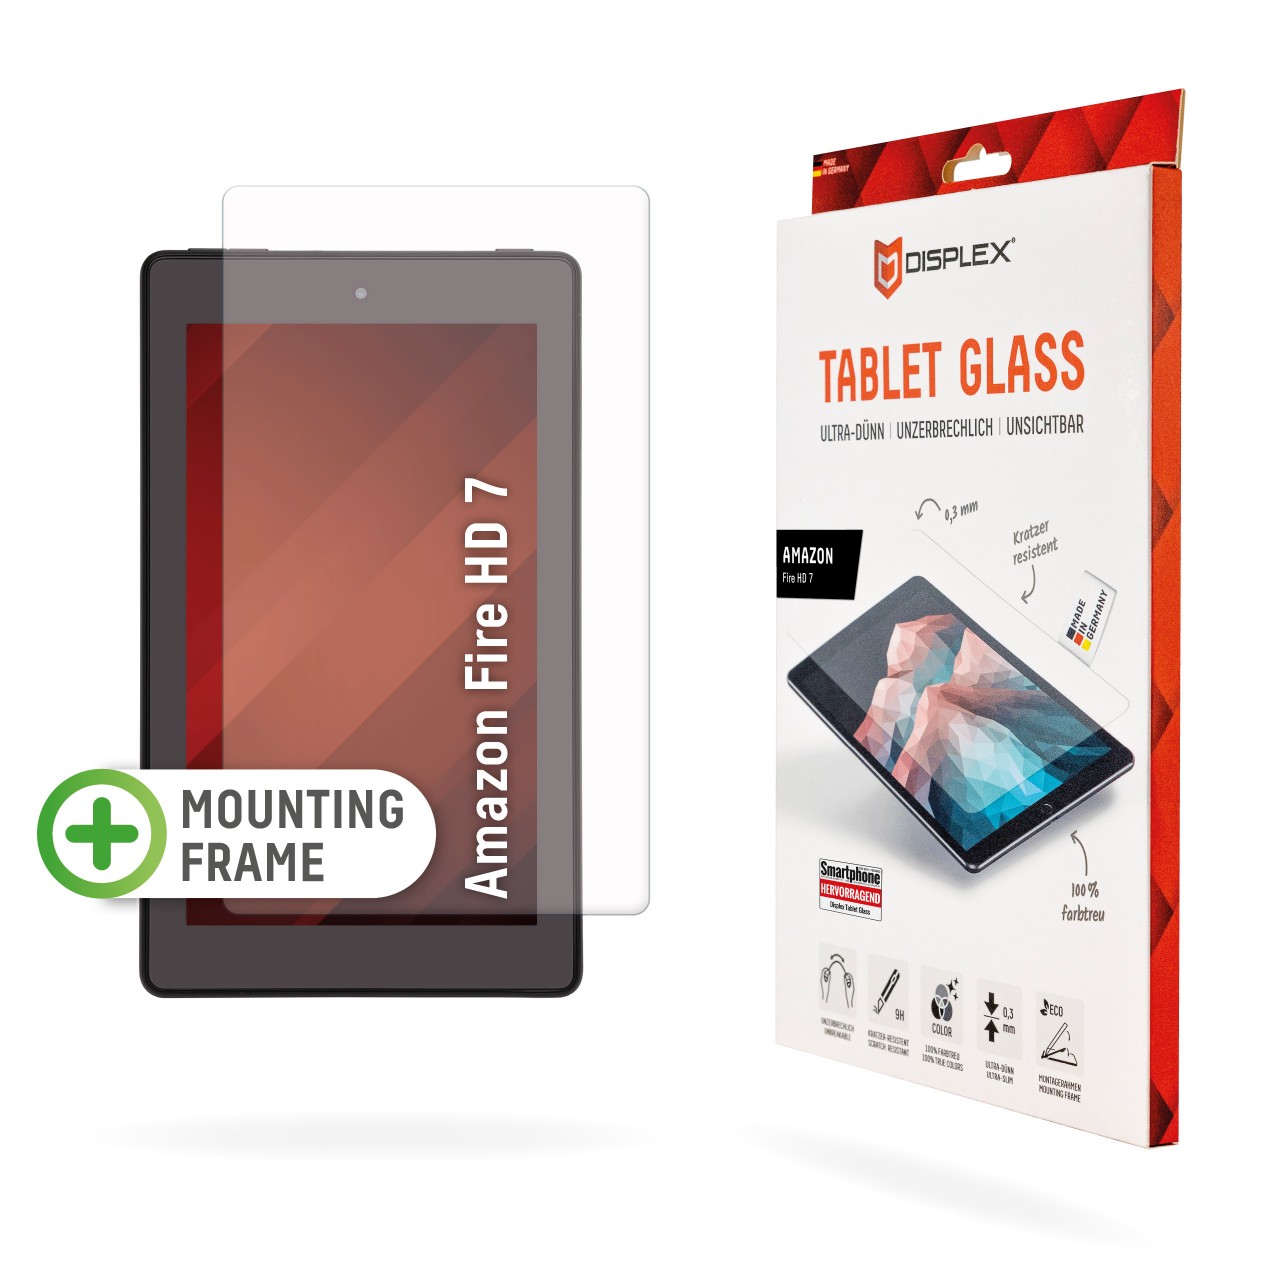 Fire 7 Tablet Glass